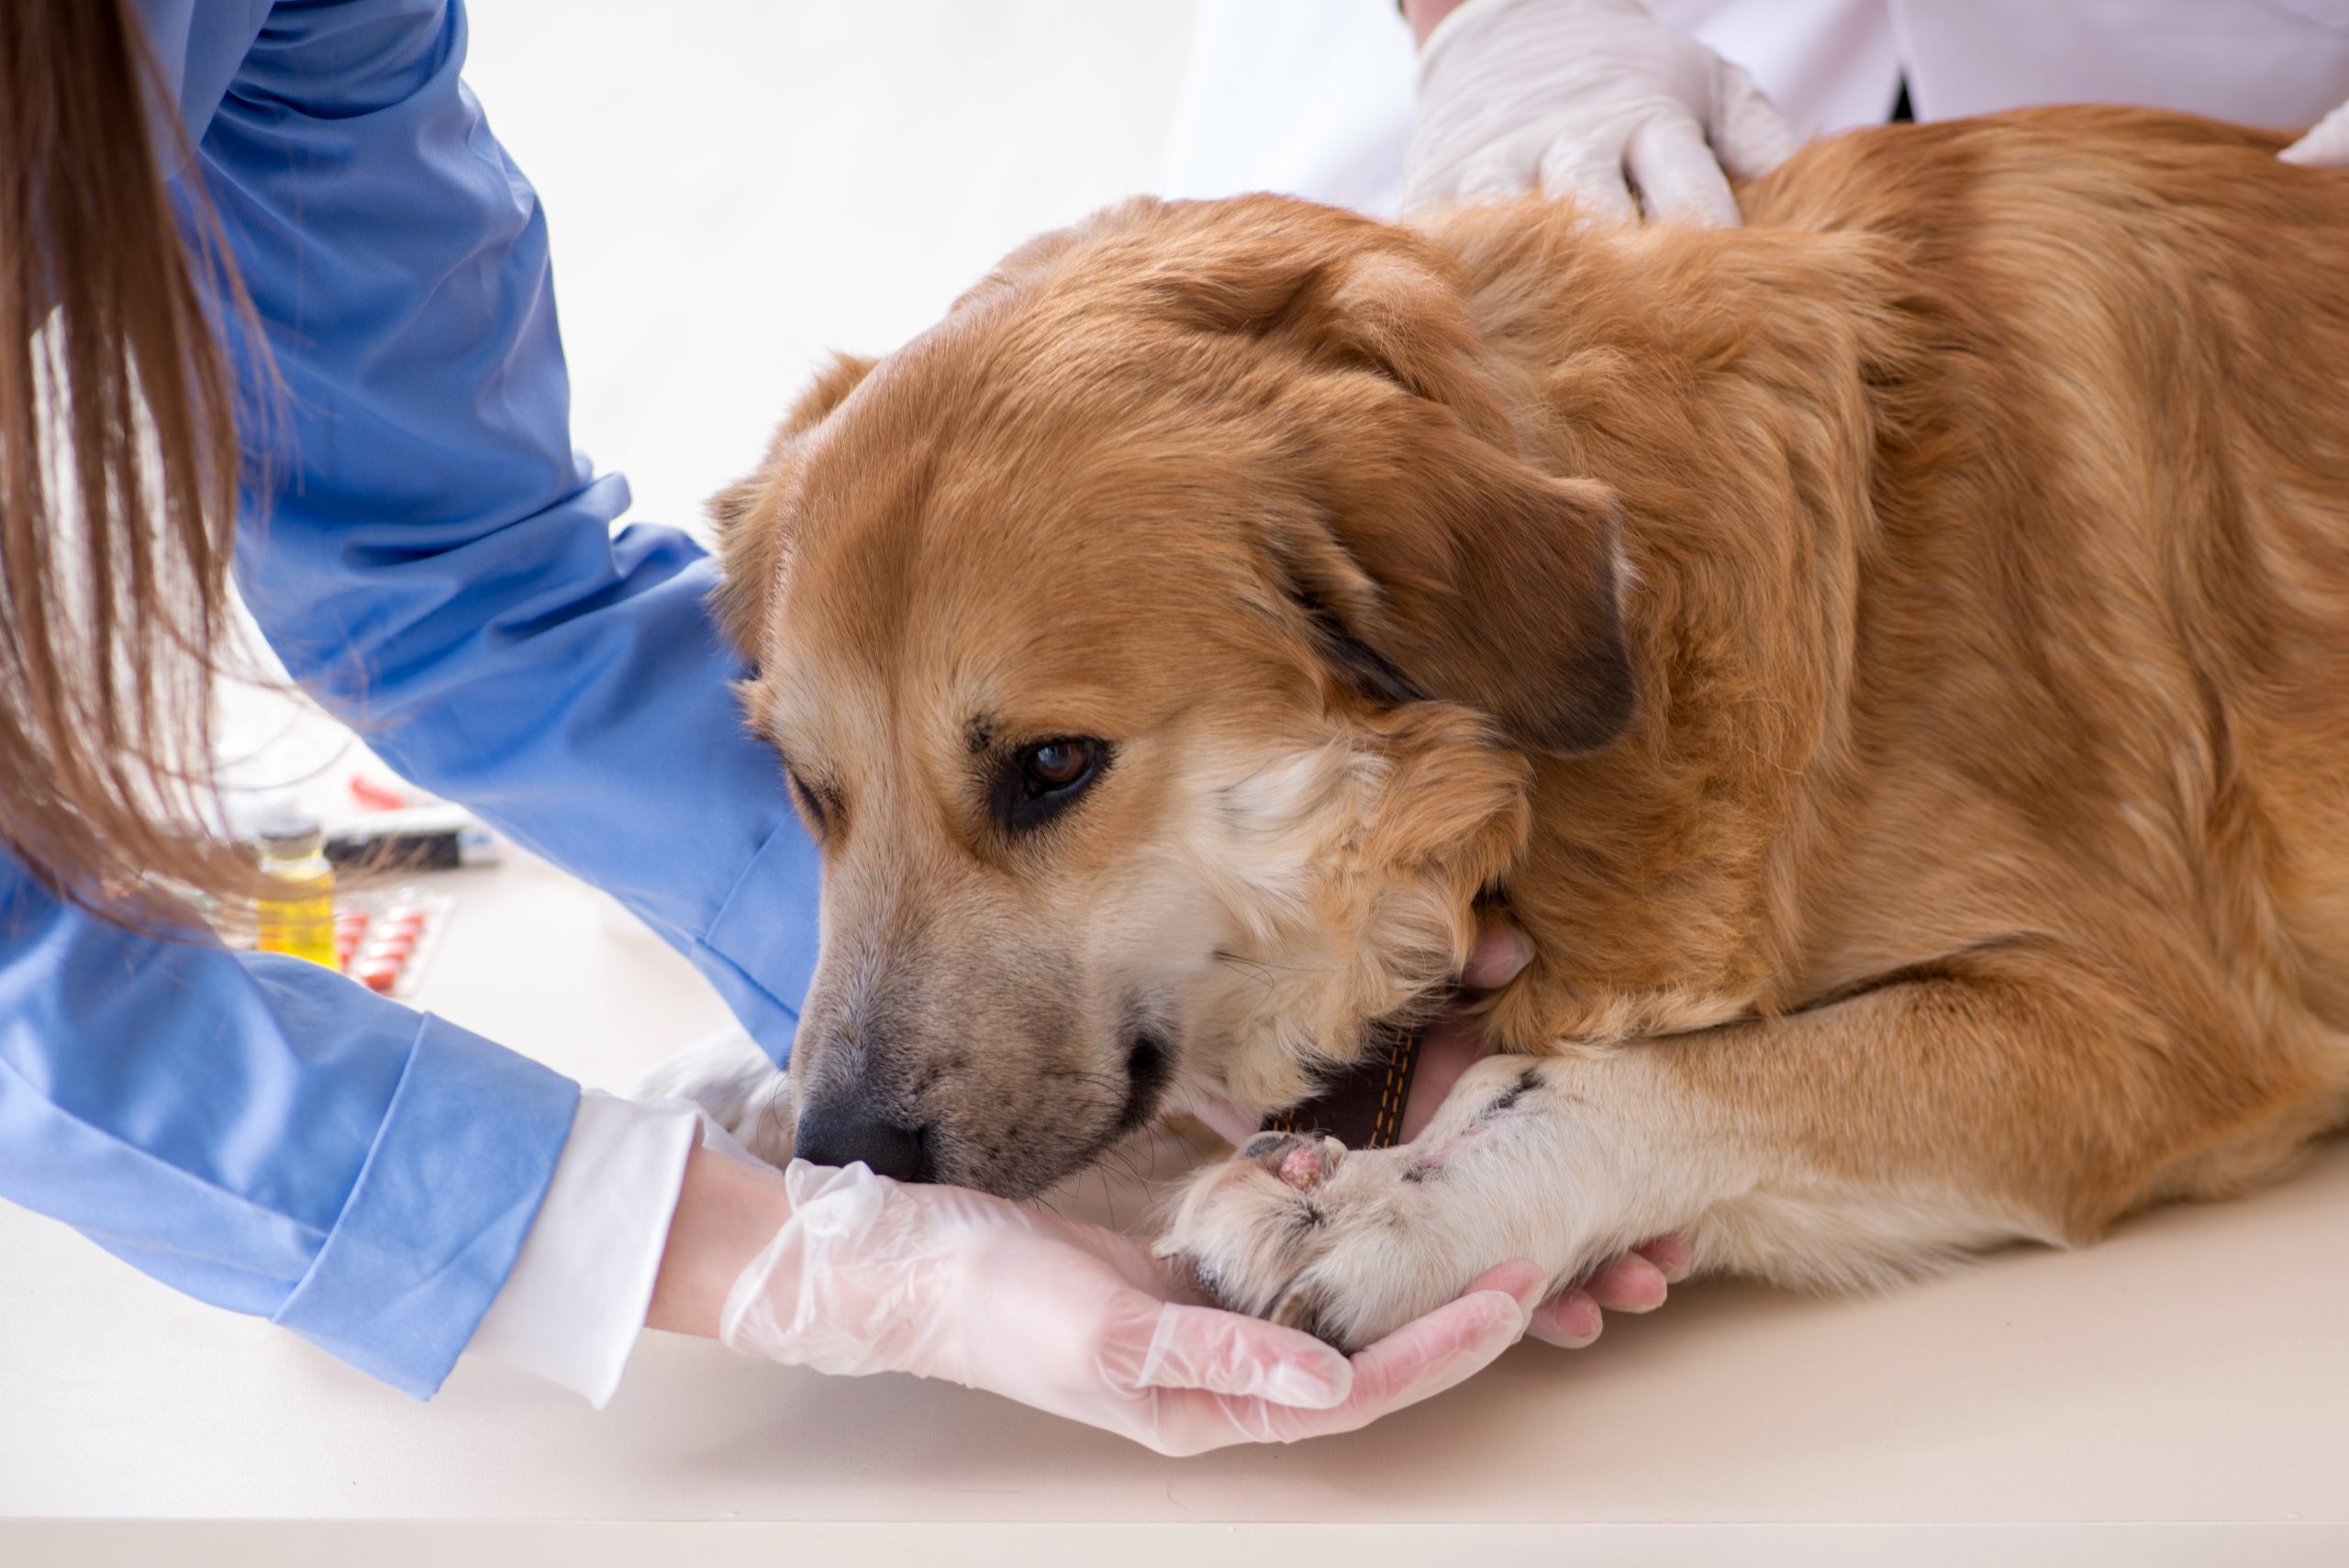 First Aid Kit for Dogs &#8211; Be Prepared!